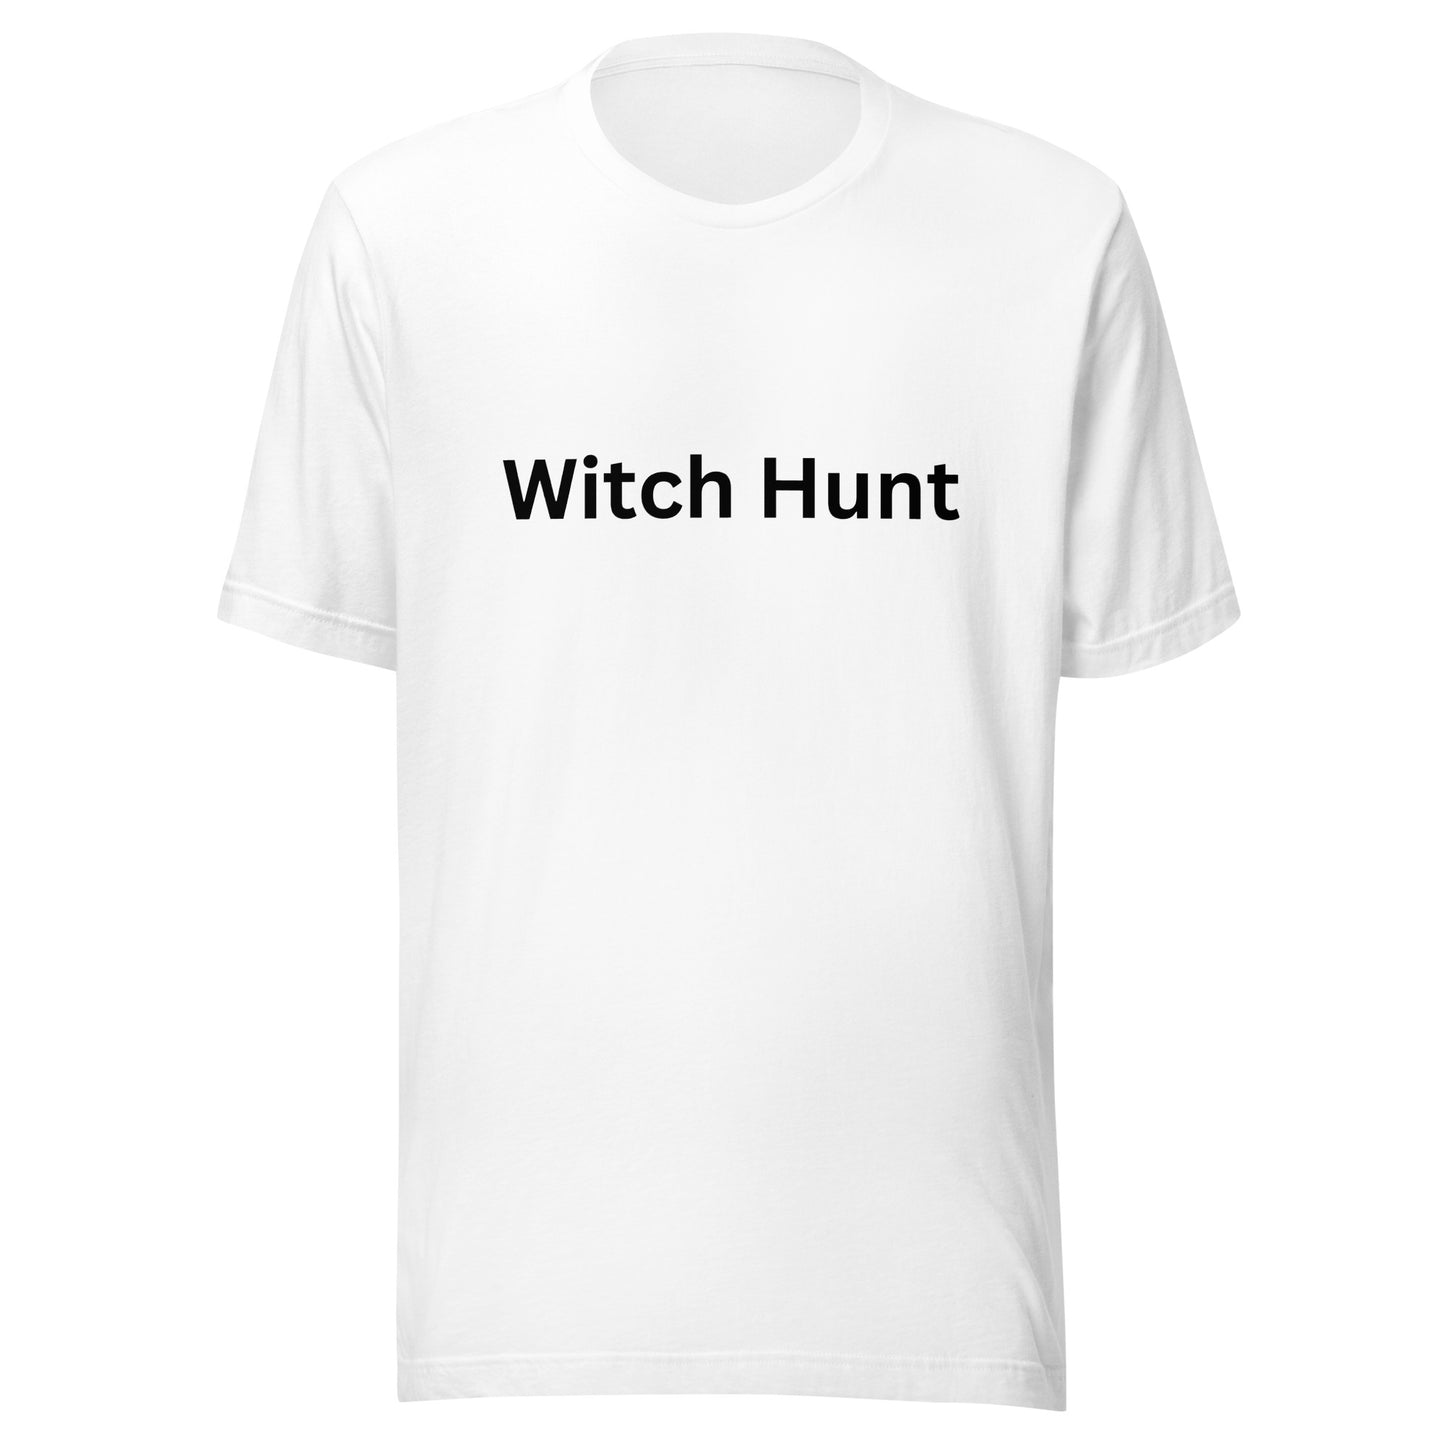 Witch Hunt T-Shirt